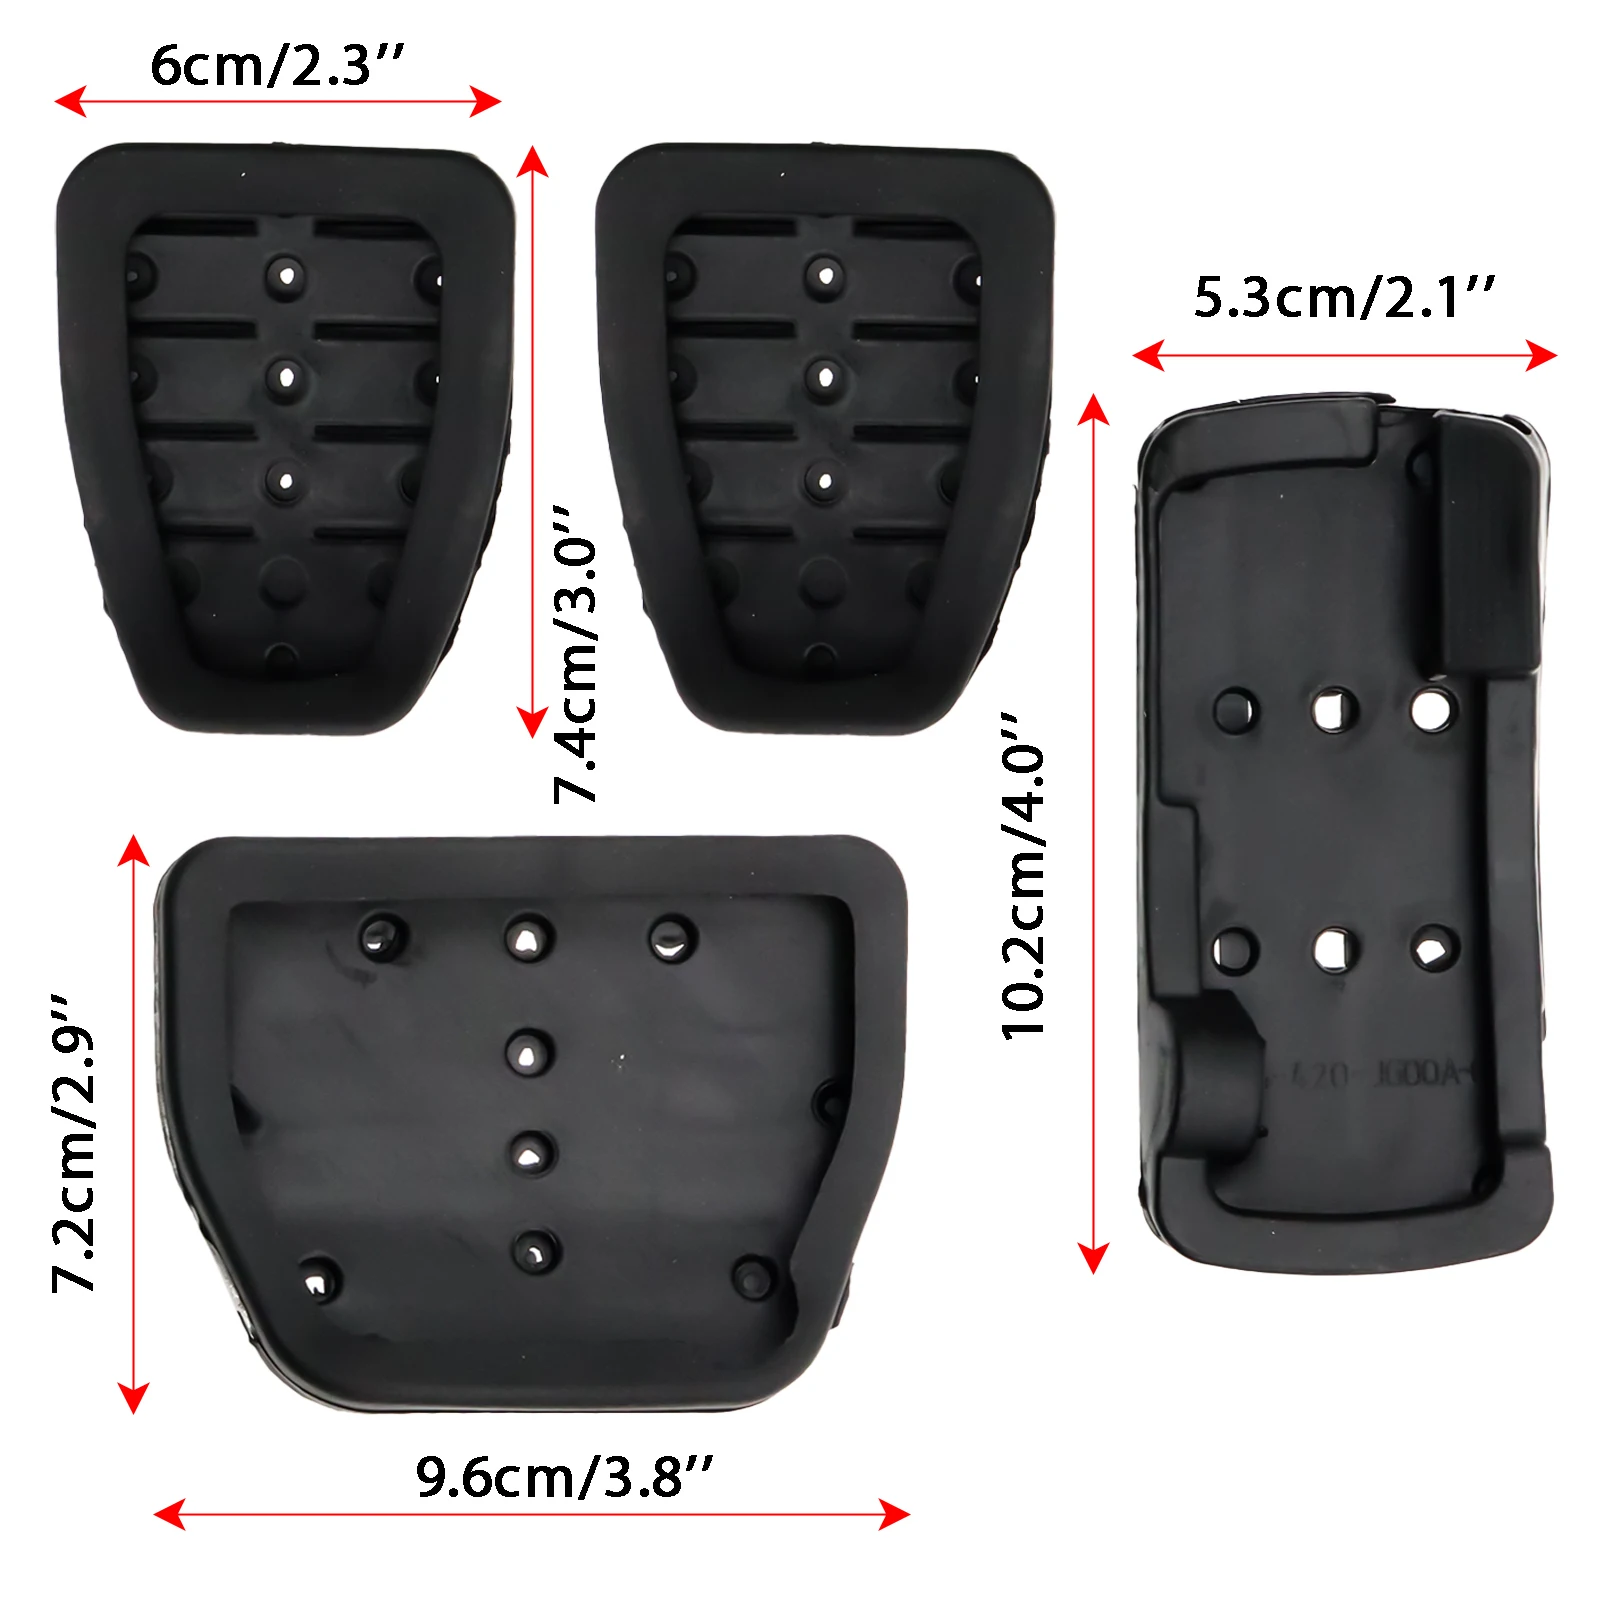 NonSlip AT MT Gas Brake Foot Pedal Pad Cover Kit Stainless Steel For Nissan Qashqai J10 X-trail T31 Rogue Sport Styling Parts